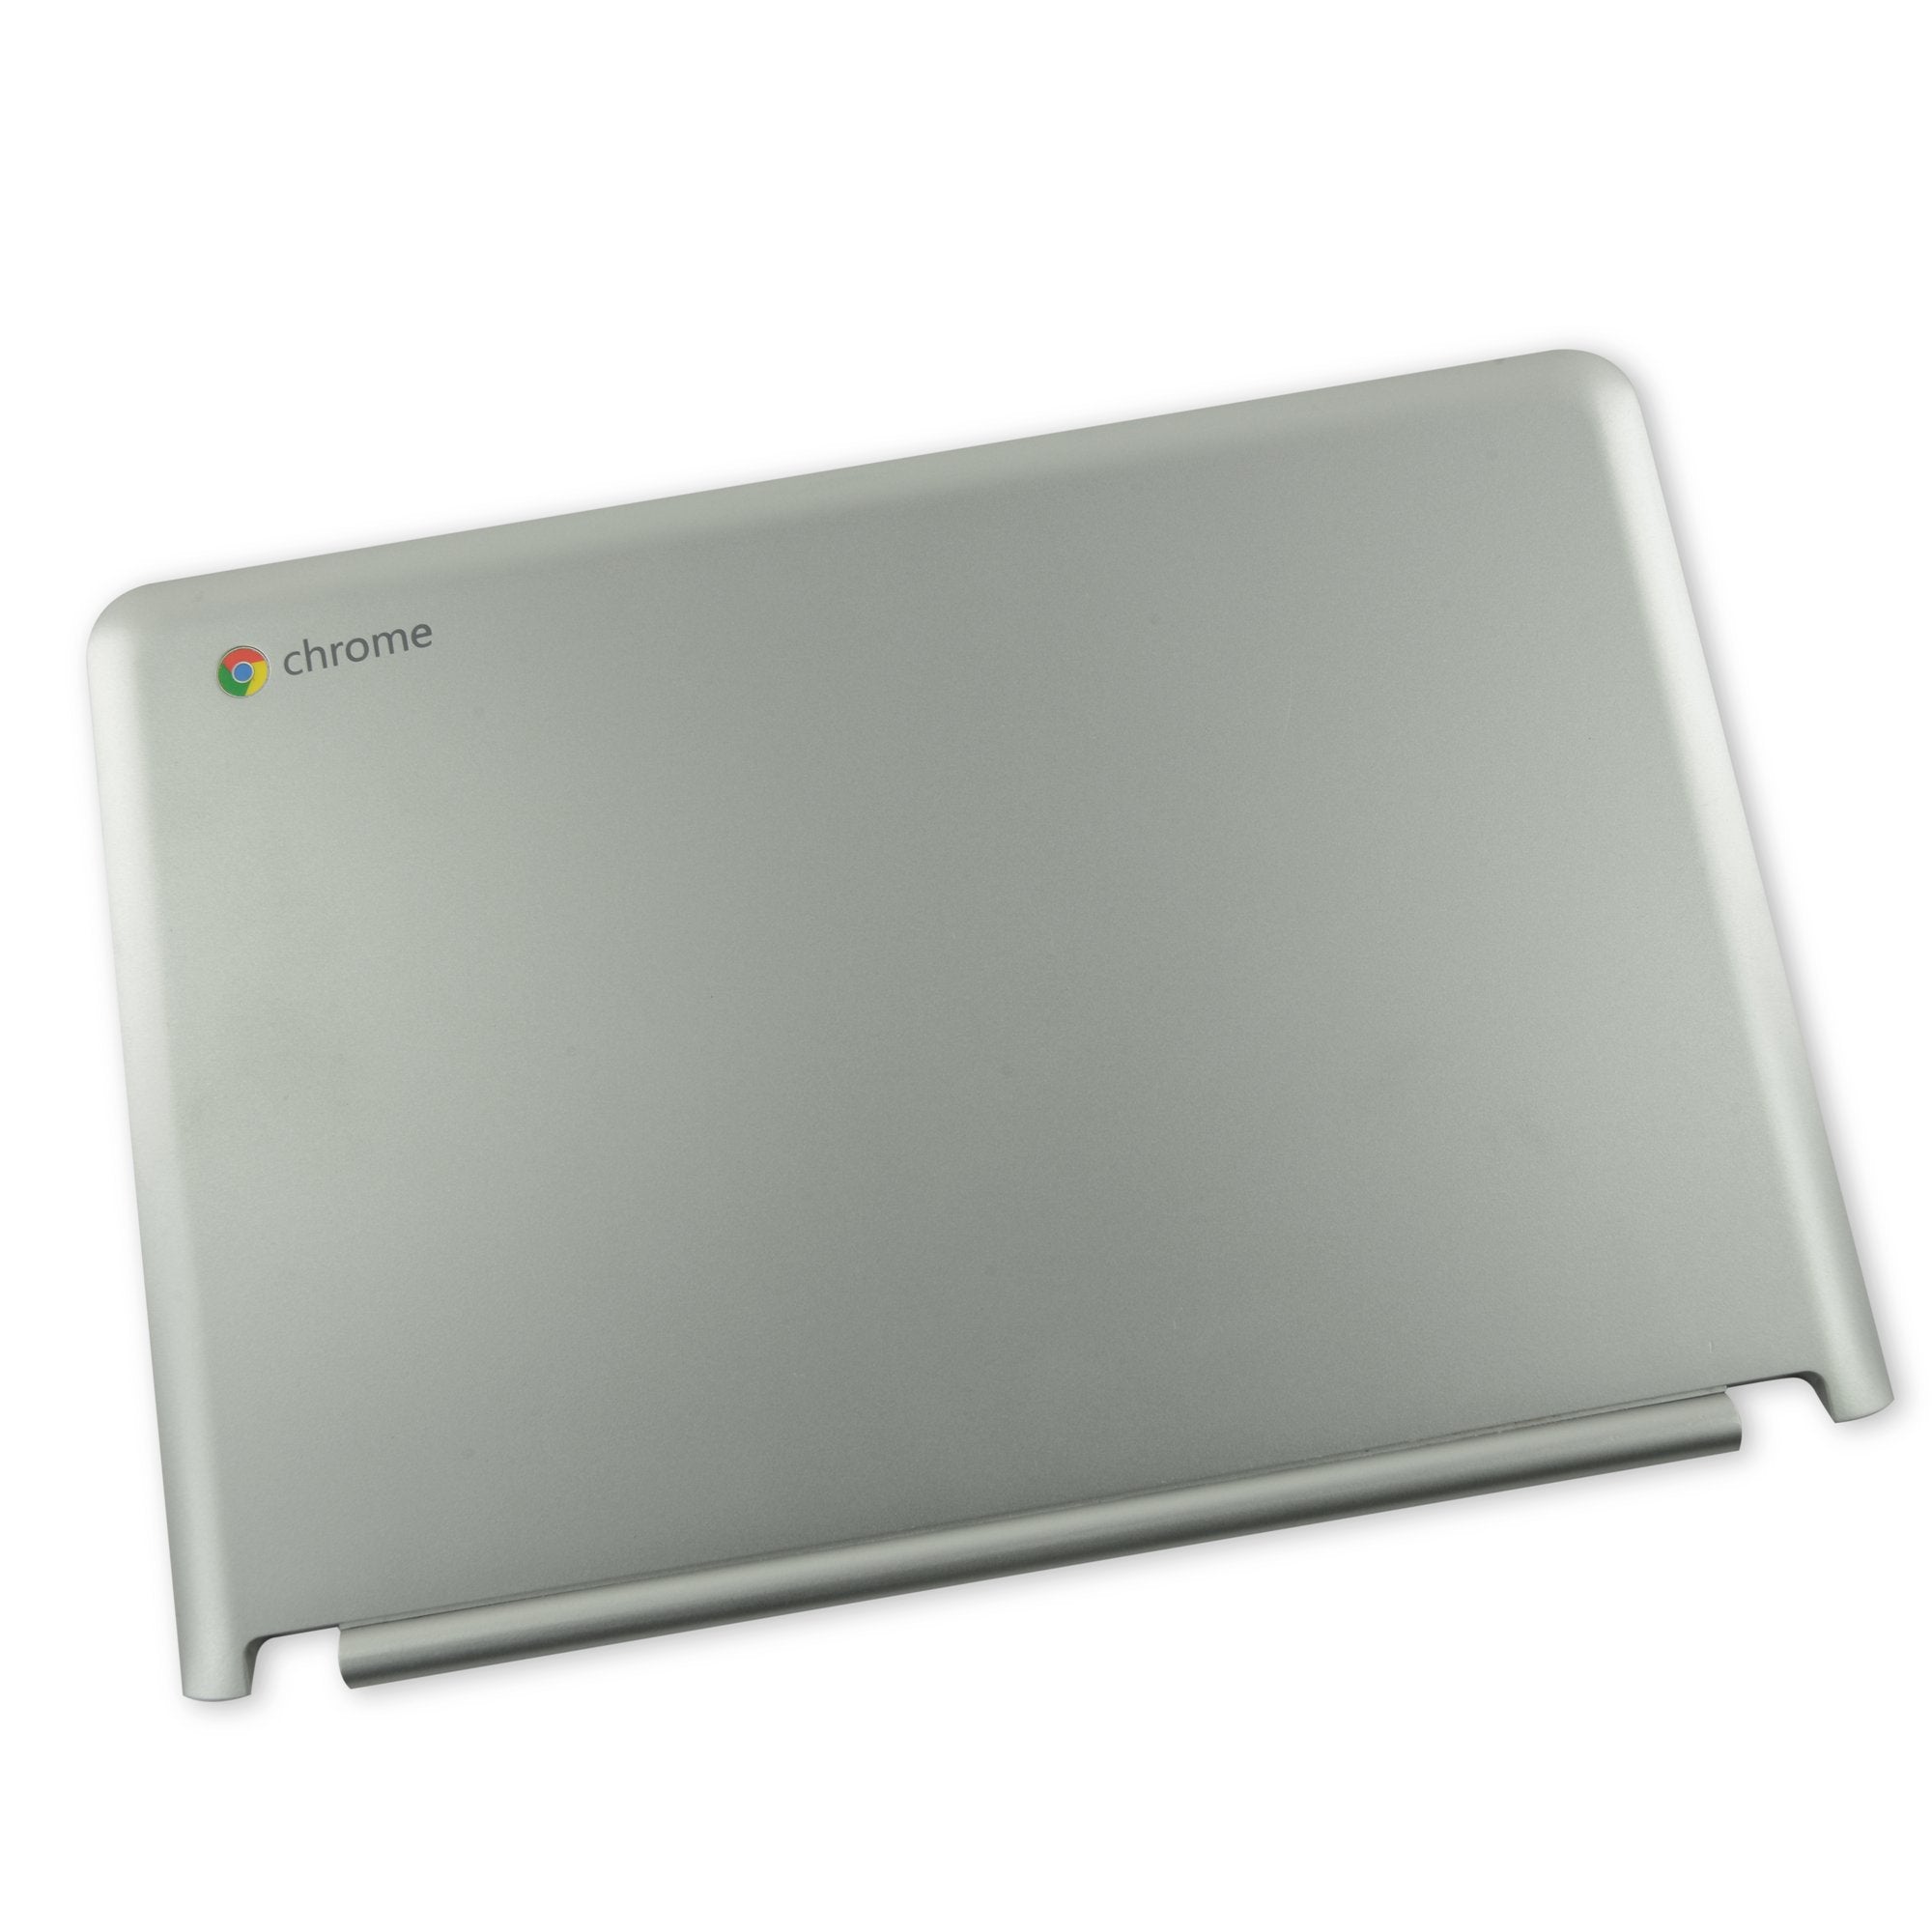 Samsung Chromebook XE303C12 LCD Back Cover